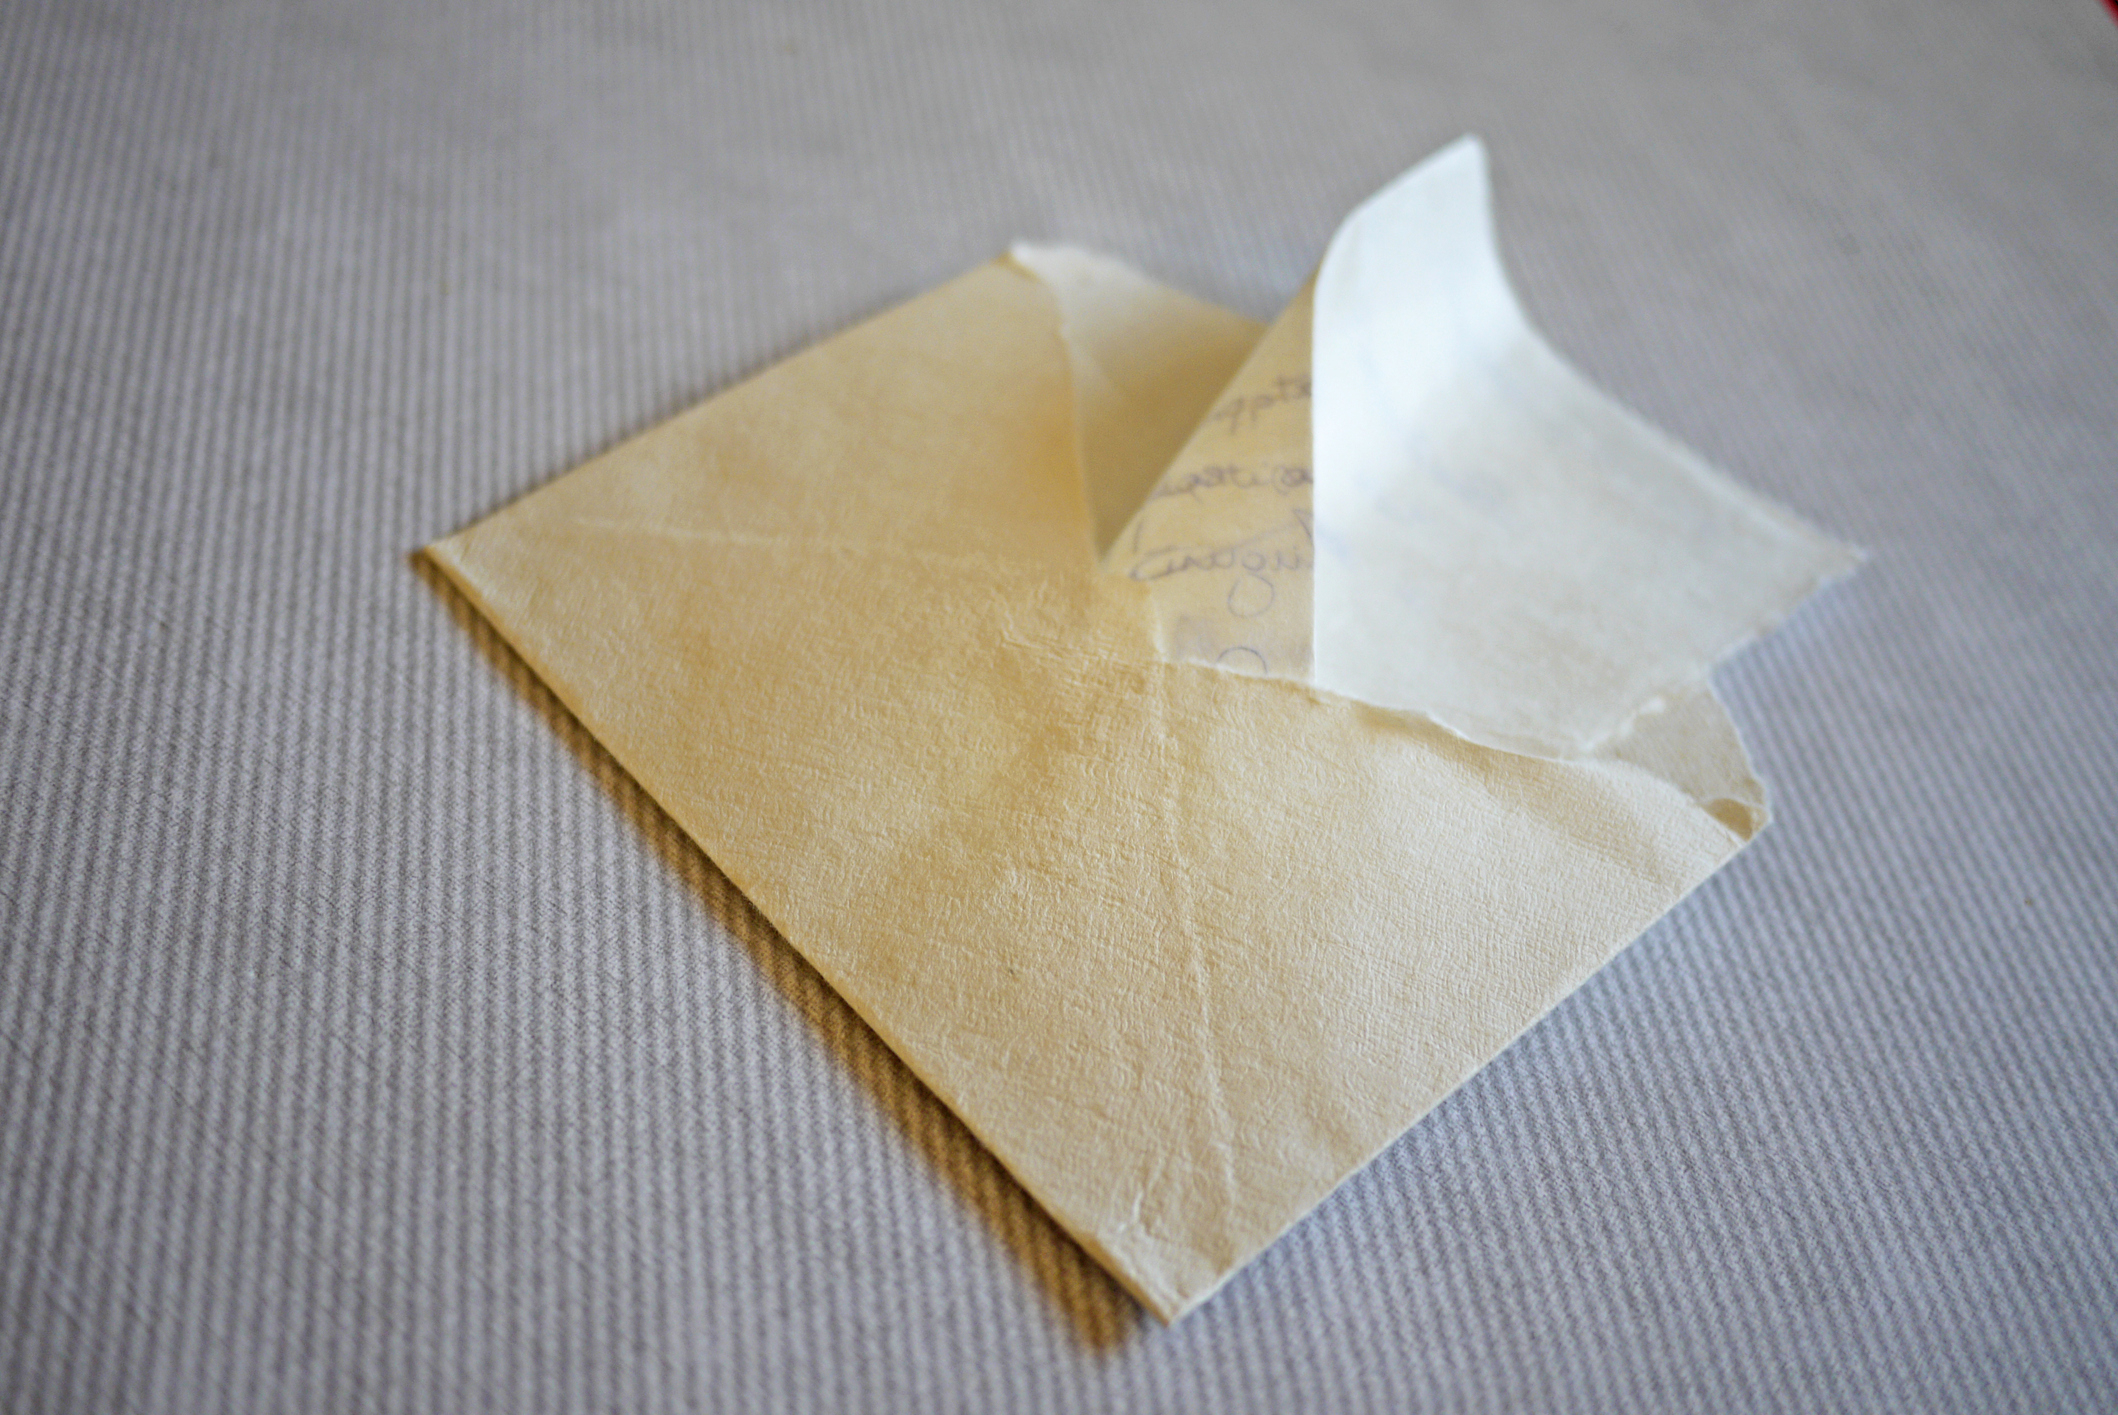 A partially opened envelope with a visible letter on a fabric surface